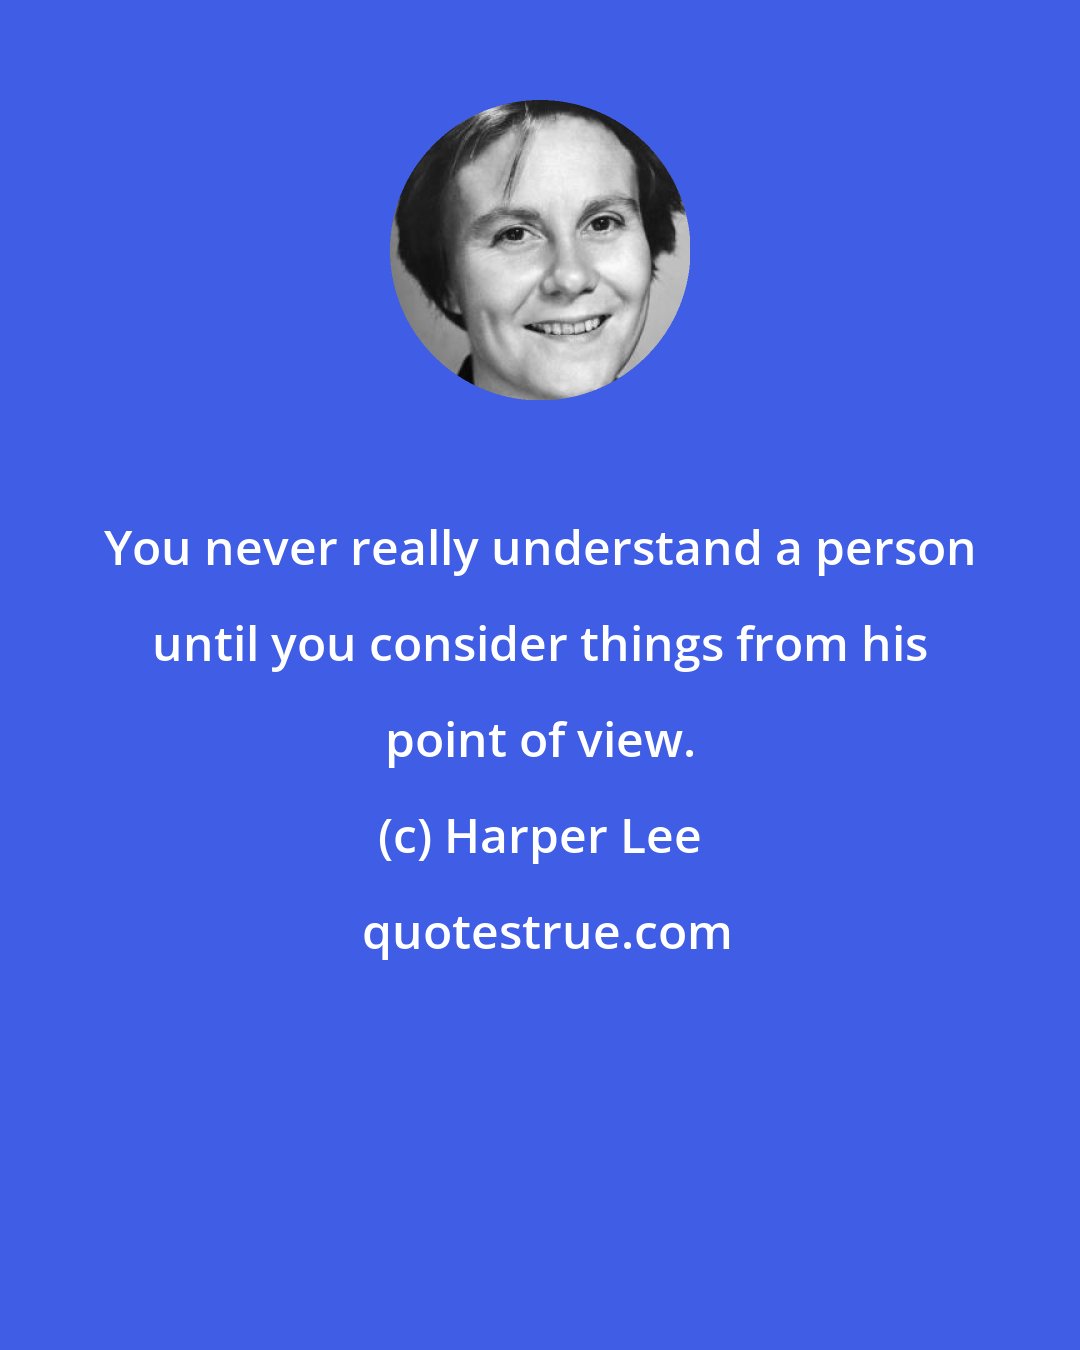 Harper Lee: You never really understand a person until you consider things from his point of view.